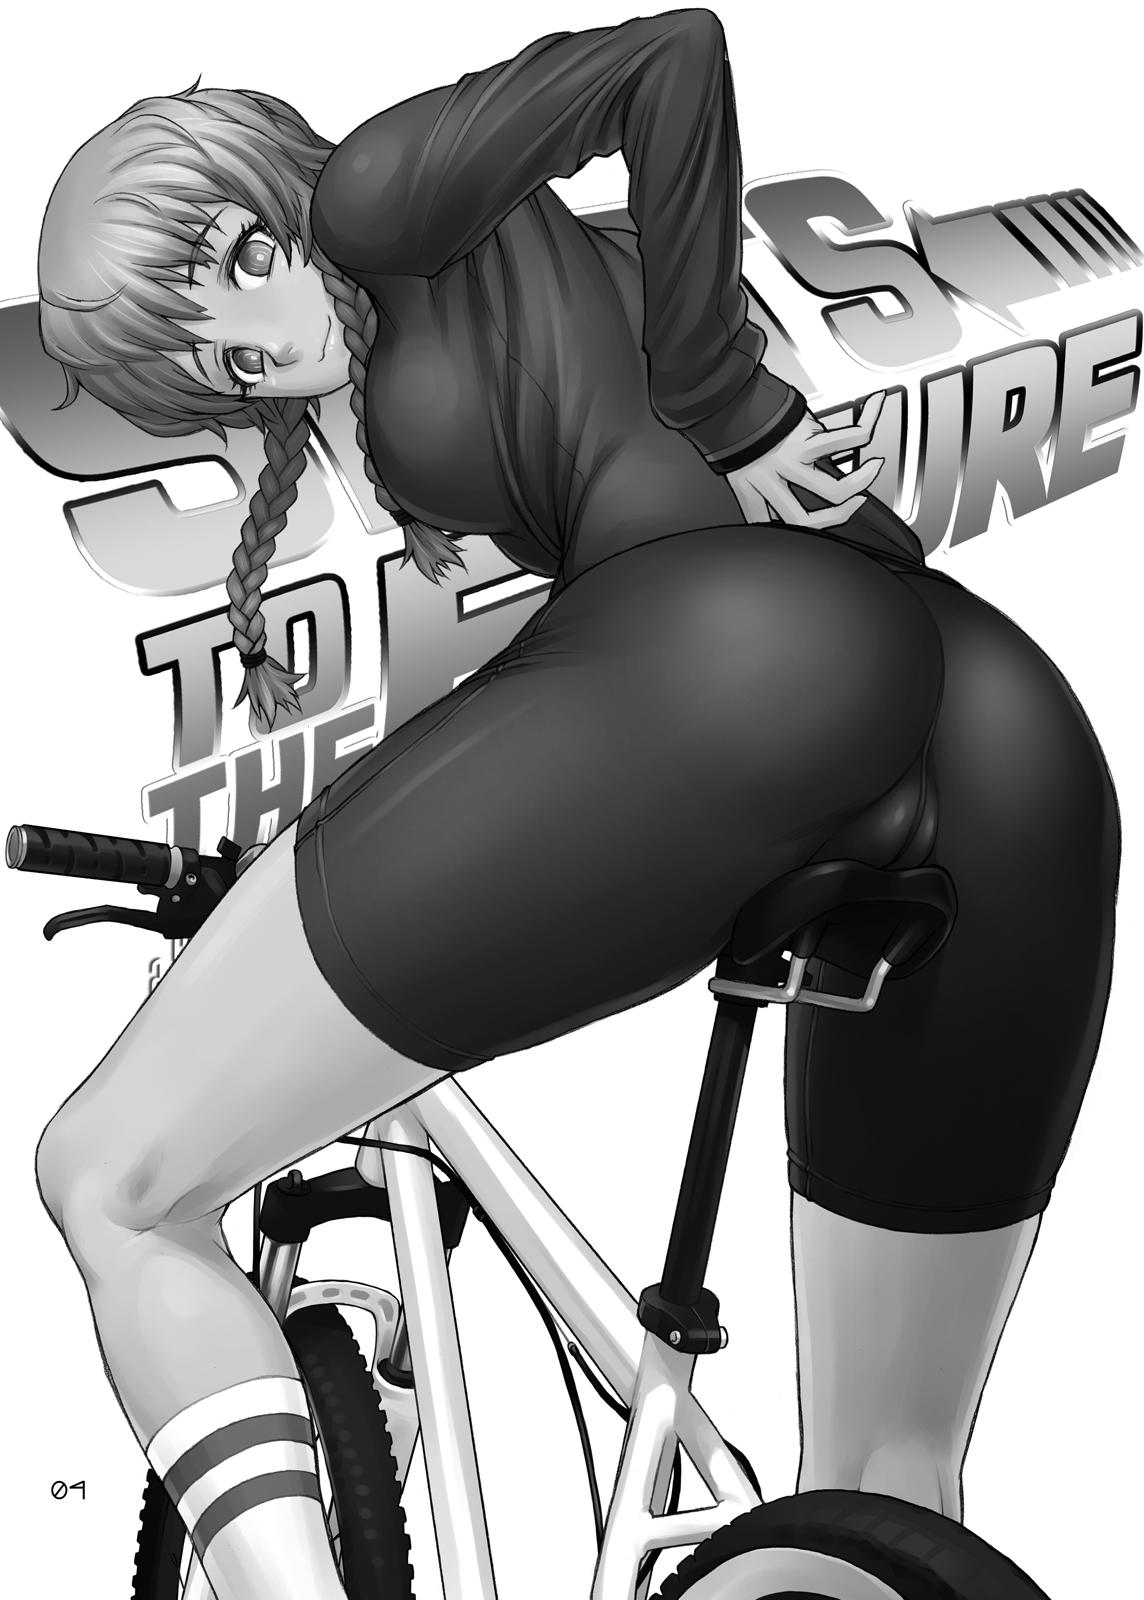 Shecock SPATS TO THE FUTURE - Steinsgate Petite Teenager - Picture 3